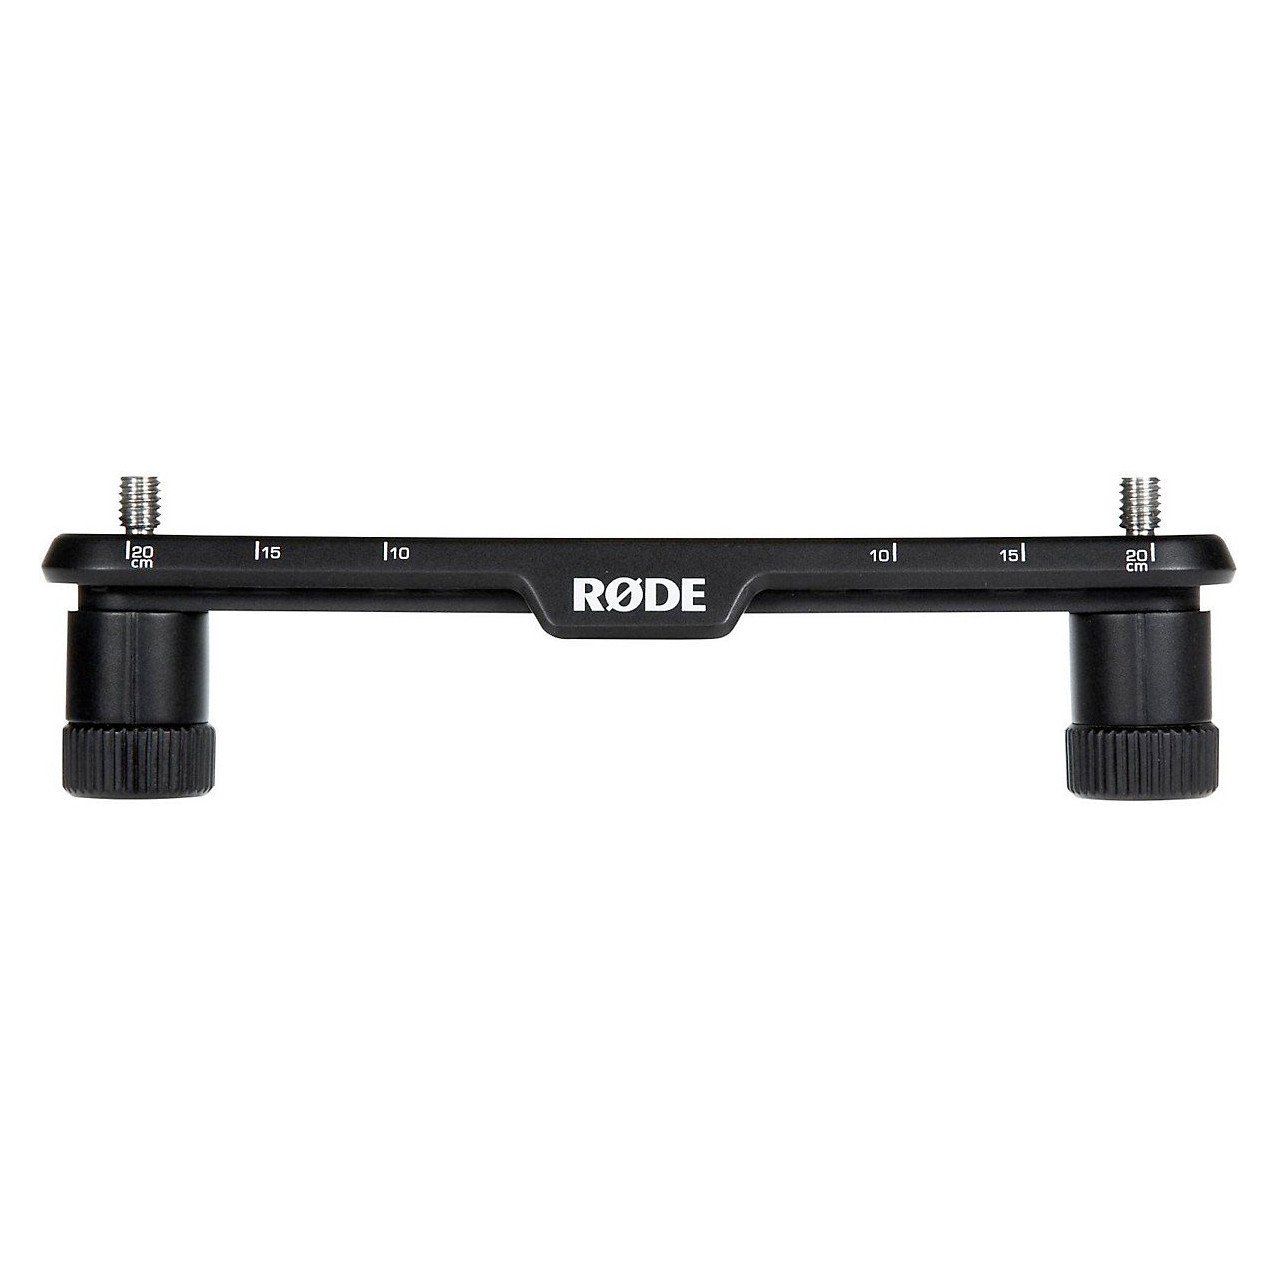 Microphone Accessories - RODE Stereo Bar